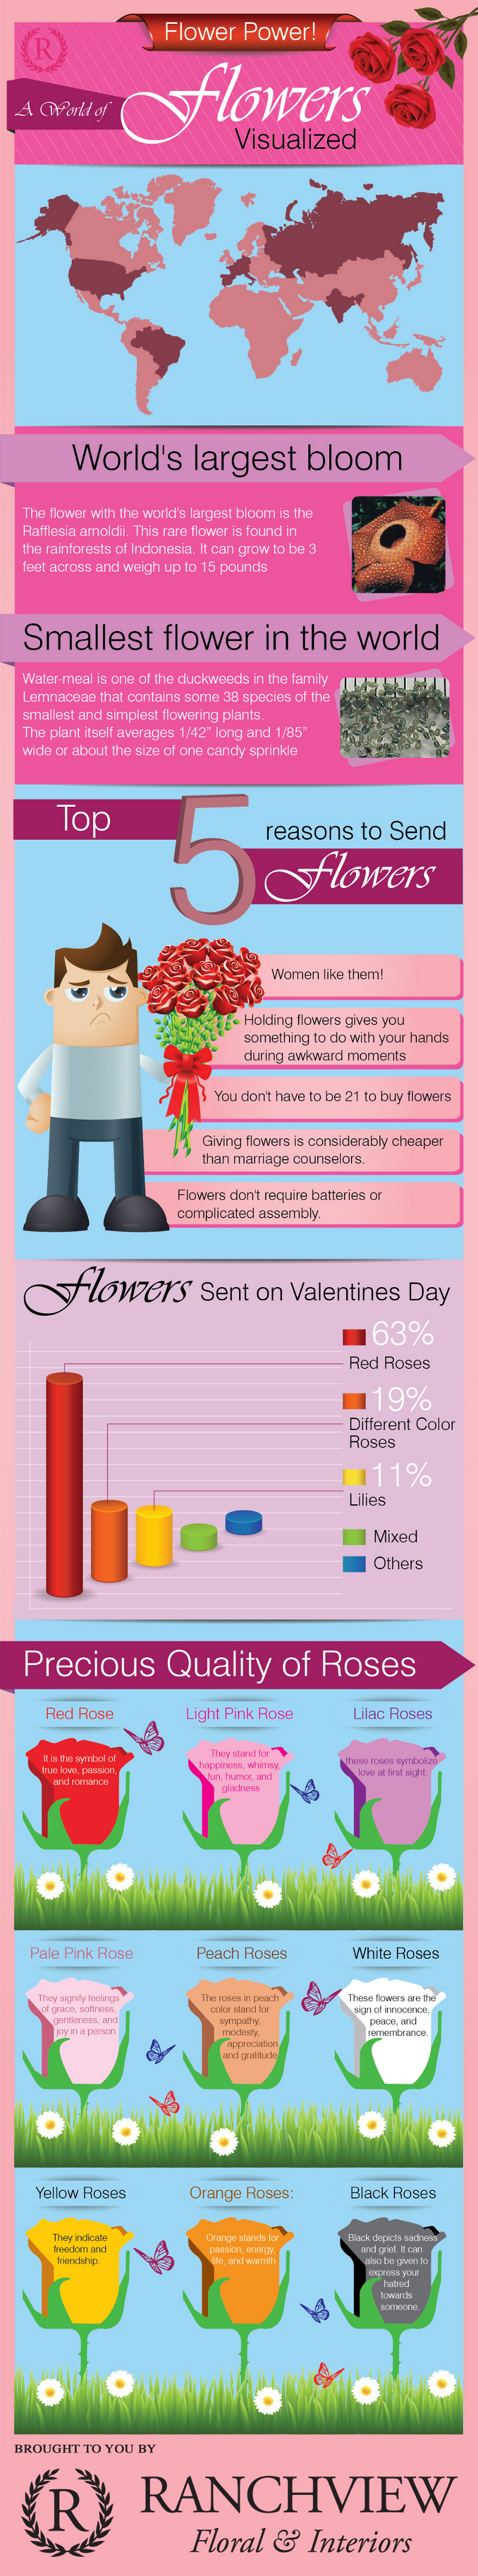 Interesting Facts About Flowers